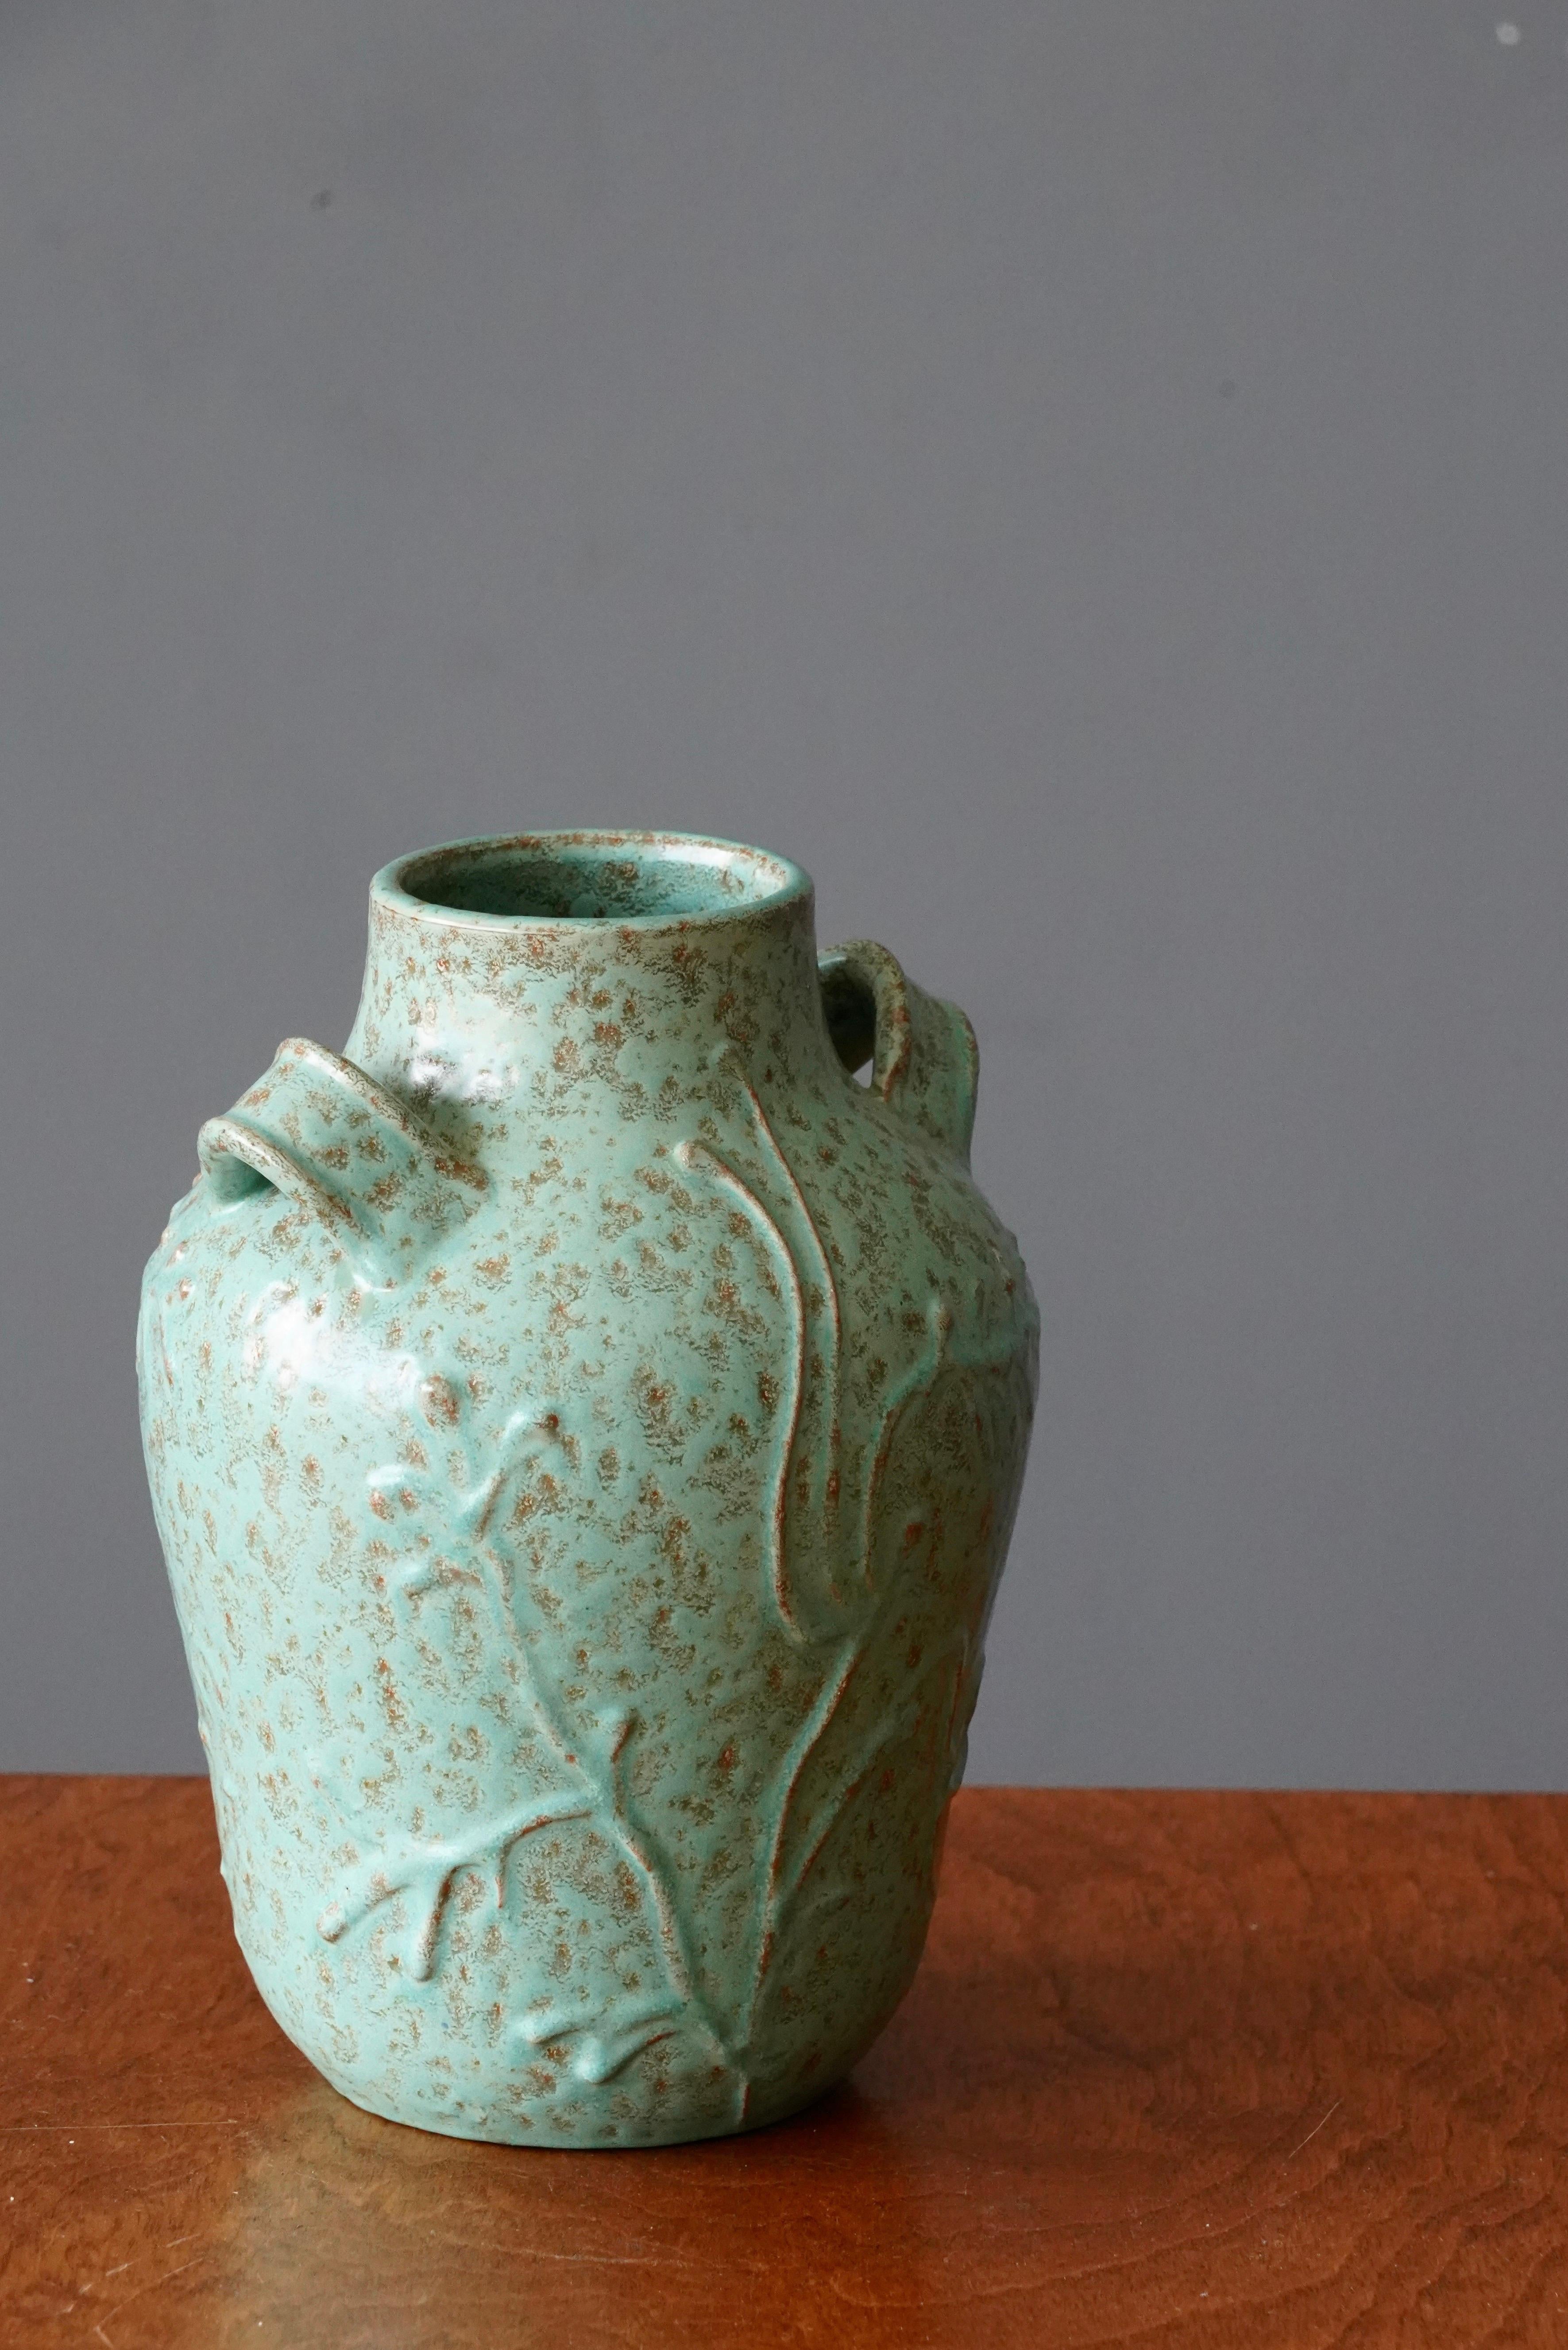 A ceramic vase by Nittsjö. Produced in Sweden, 1940s. Signed. 

With floral relief motifs.

Other designers of the period include Axel Salto, Arne Bang, Wilhelm Kåge, and Gunnar Nylund.
 